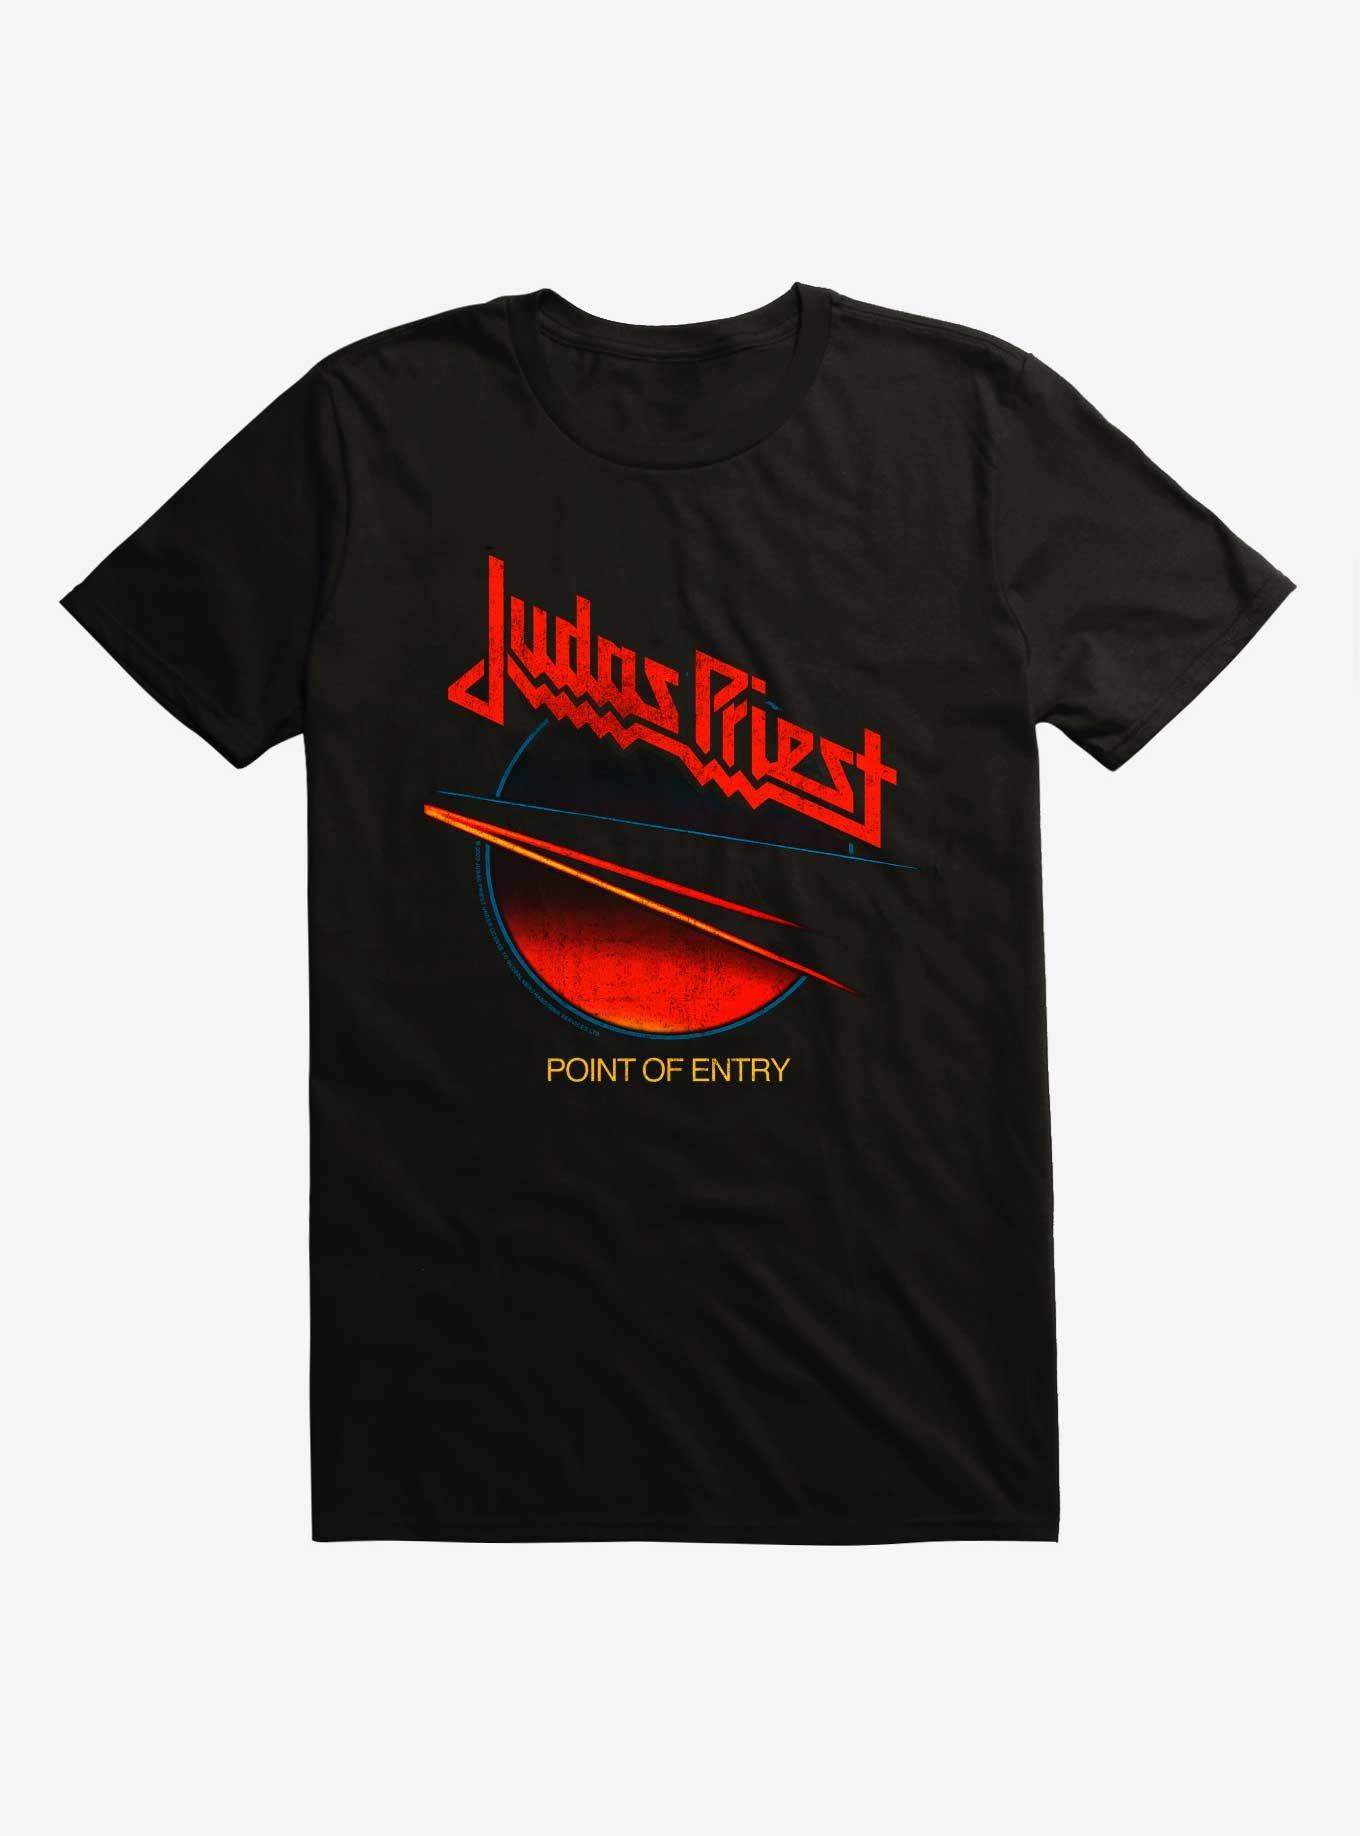 Judas Priest Point Of Entry T-Shirt - BLACK | Hot Topic